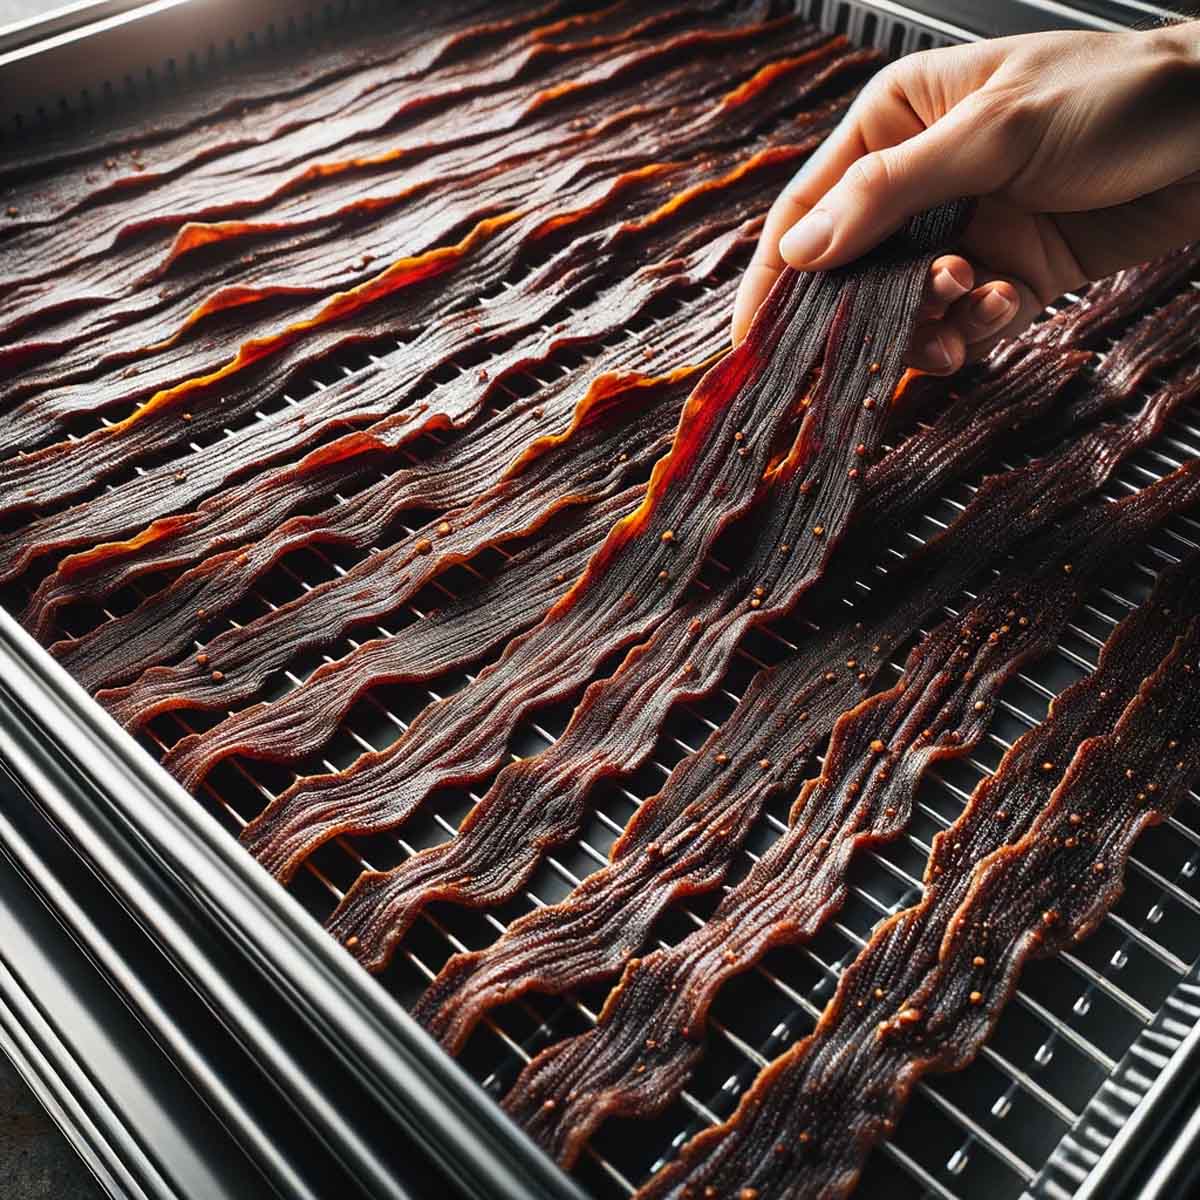 Marinated beef jerky strips neatly laid out on a stainless steel dehydrator tray, ready for drying.